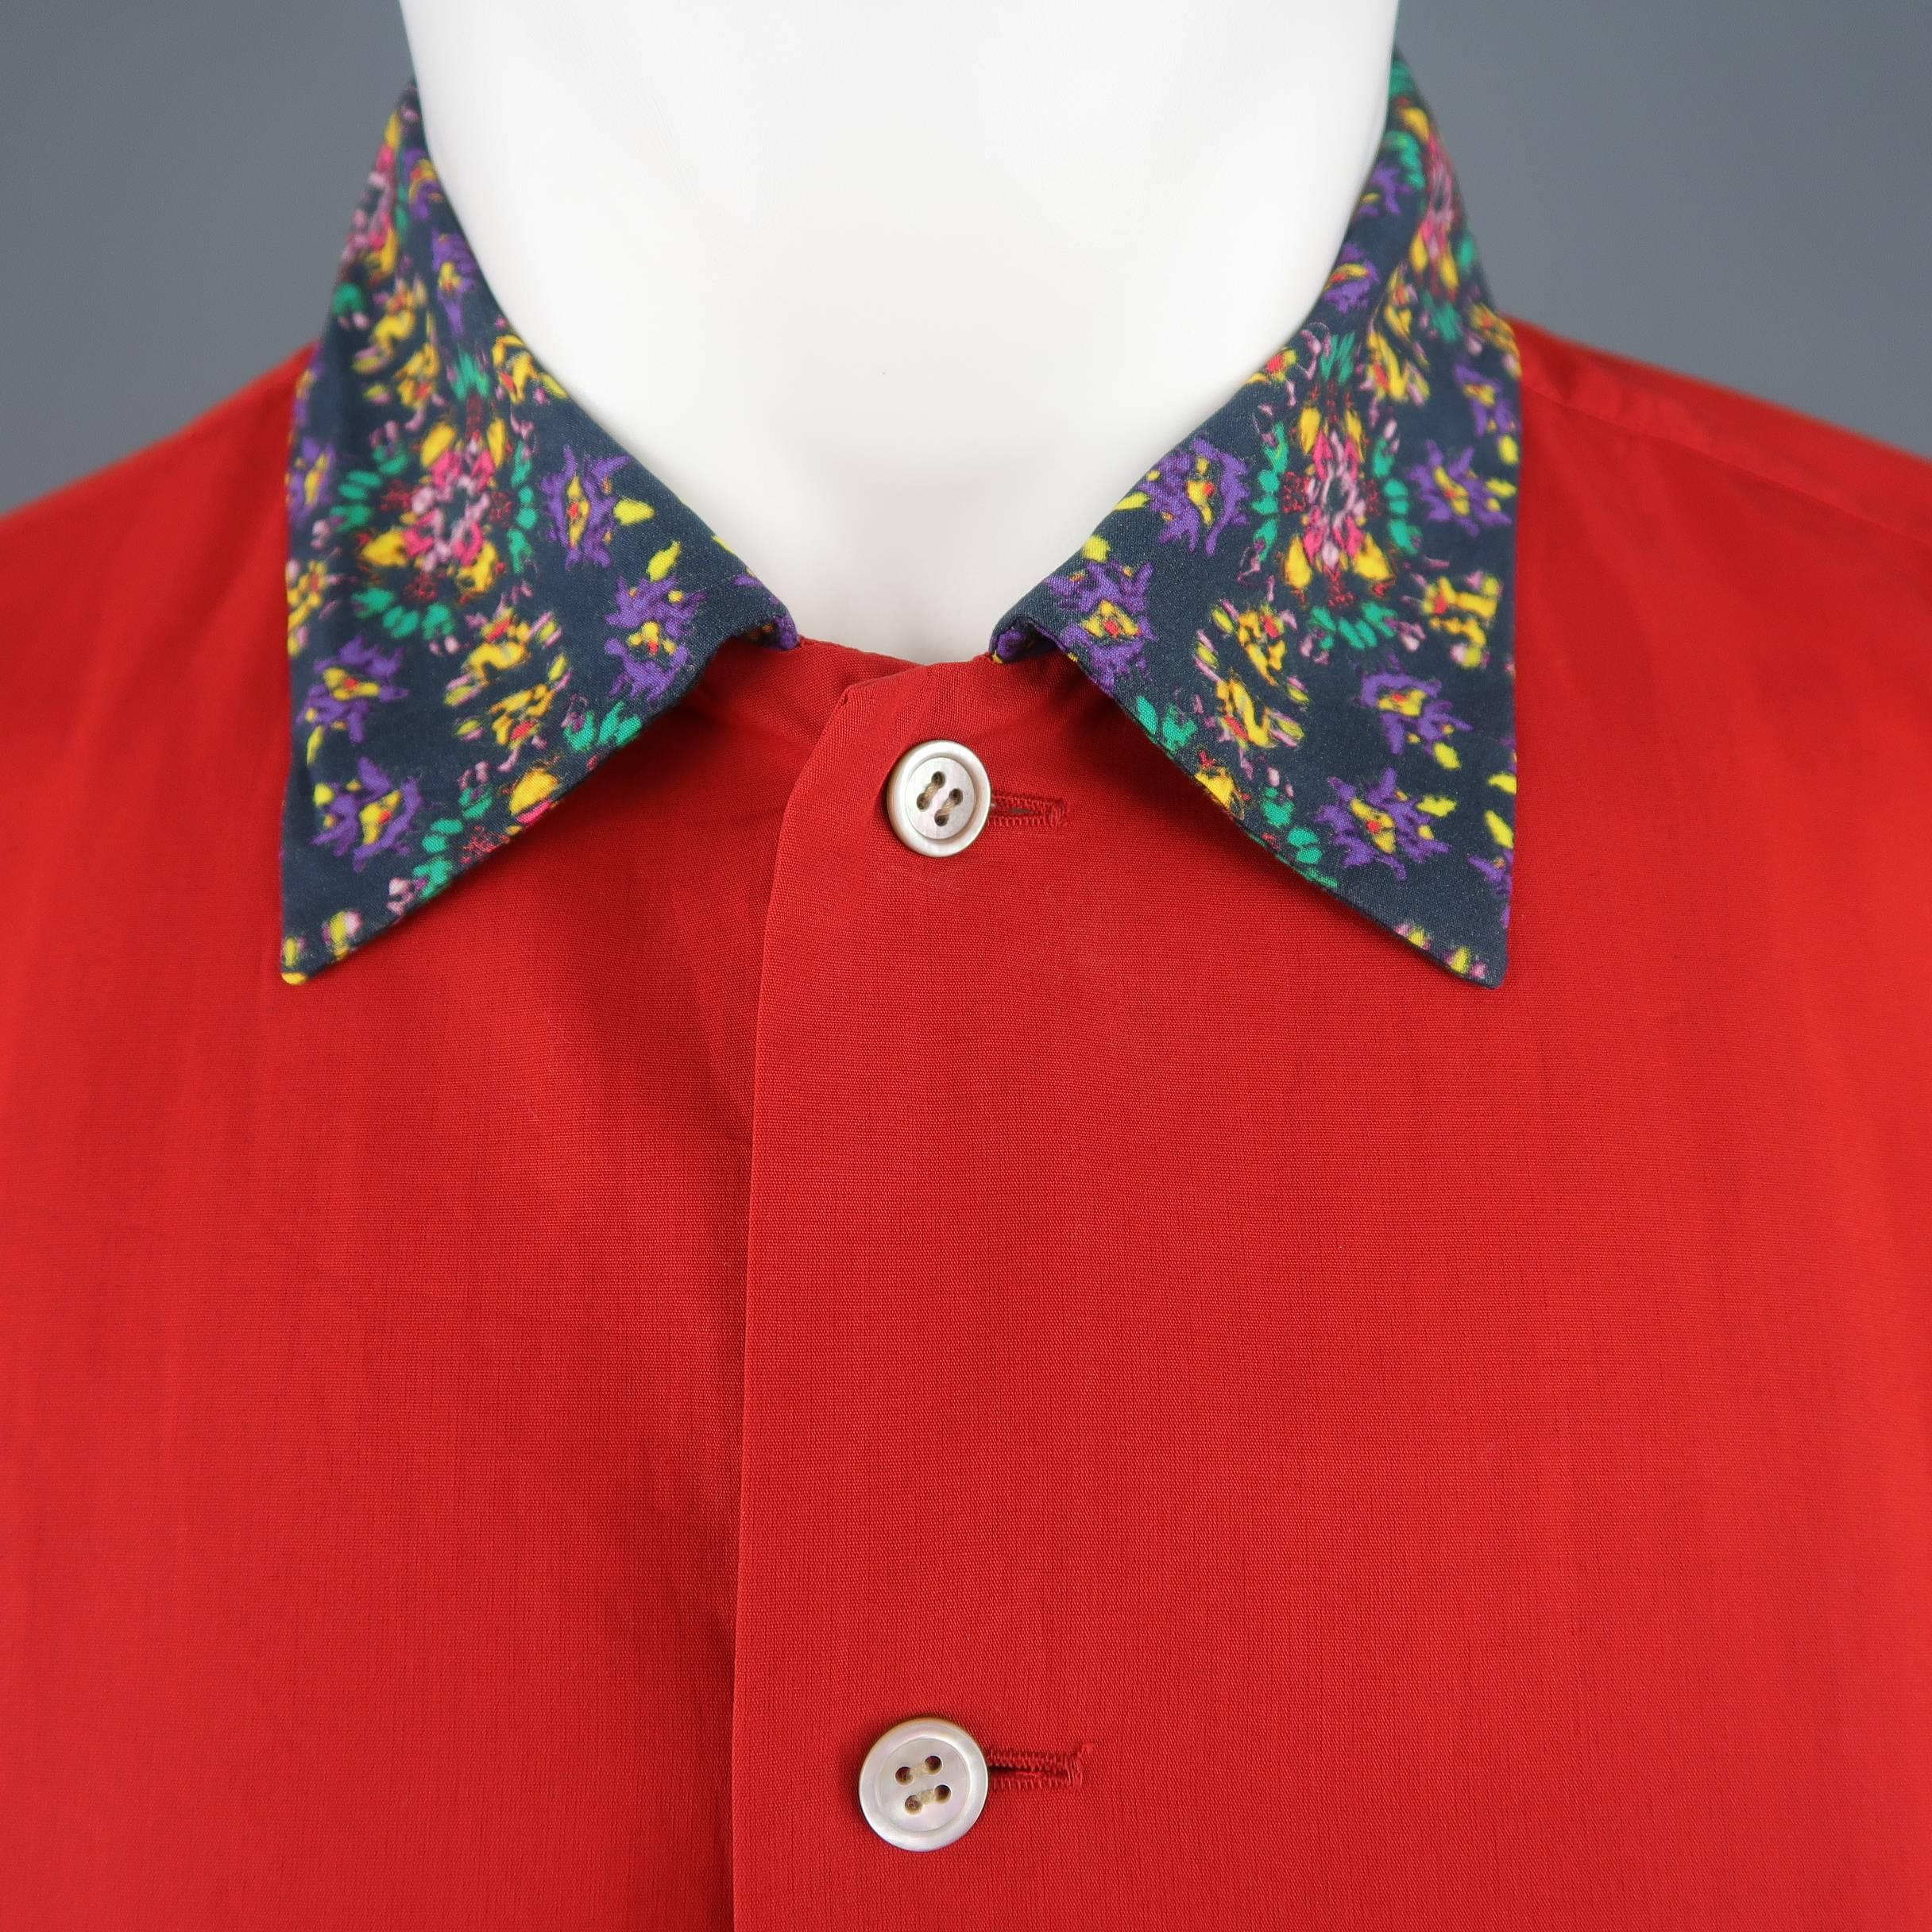 Vintage ISSEY MIYAKE shirt comes in red cotton with a patch breast pocket, black floral print pointed collar, beige floral sleeves, and charcoal and blue spotted trim. Made in Japan.
 
Good Pre-Owned Condition.
Marked: JP 2
 
Measurements:
